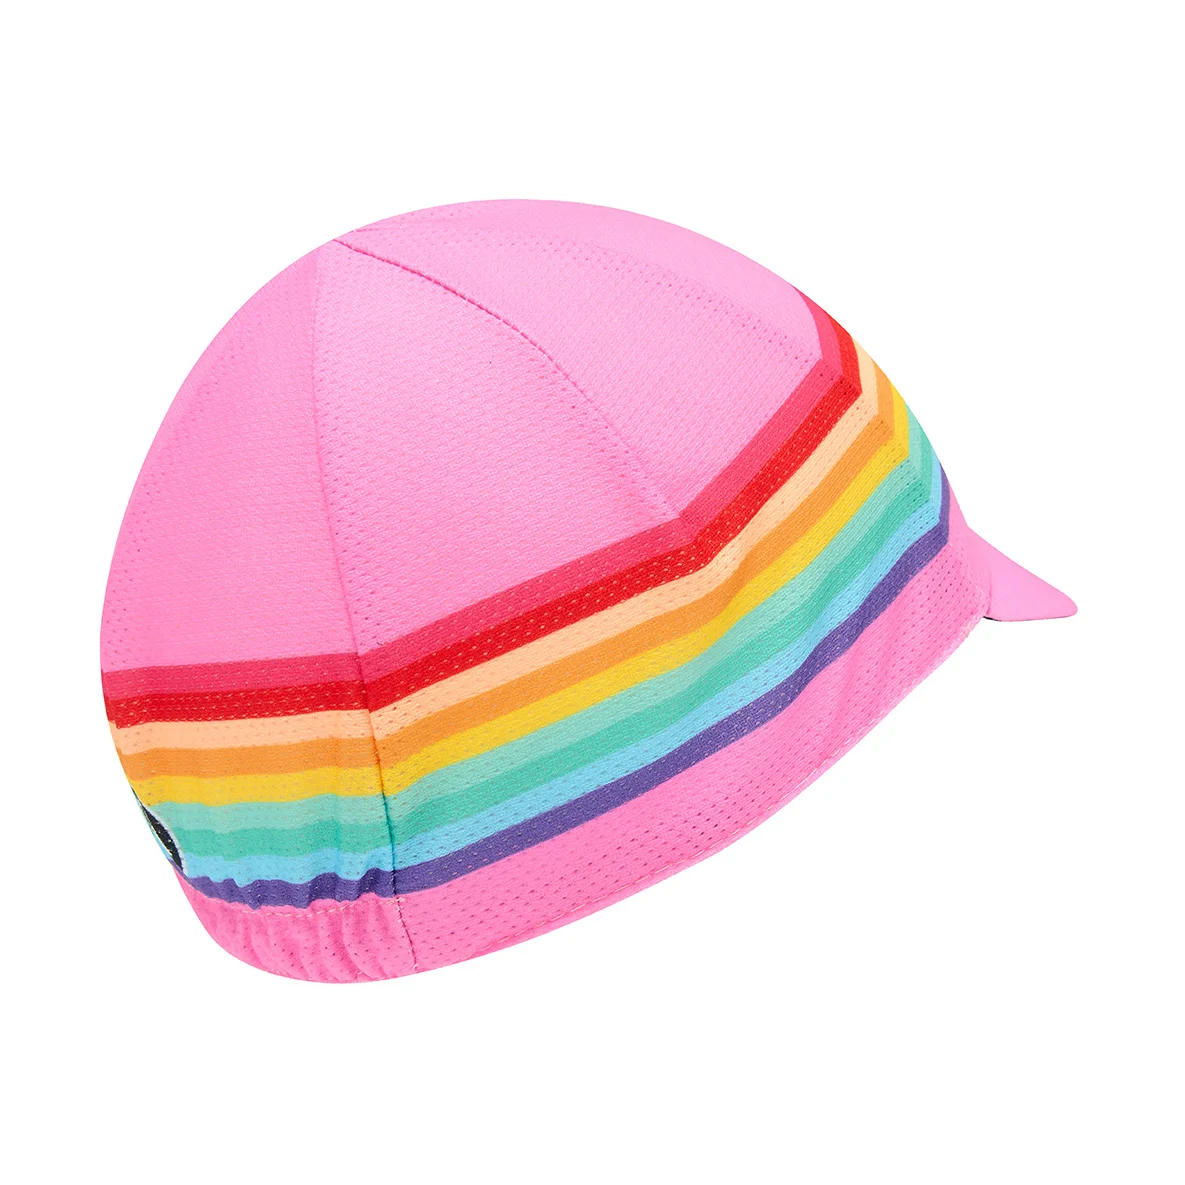 Stolen Goat Arcadia pink and rainbow stripe cycling cap